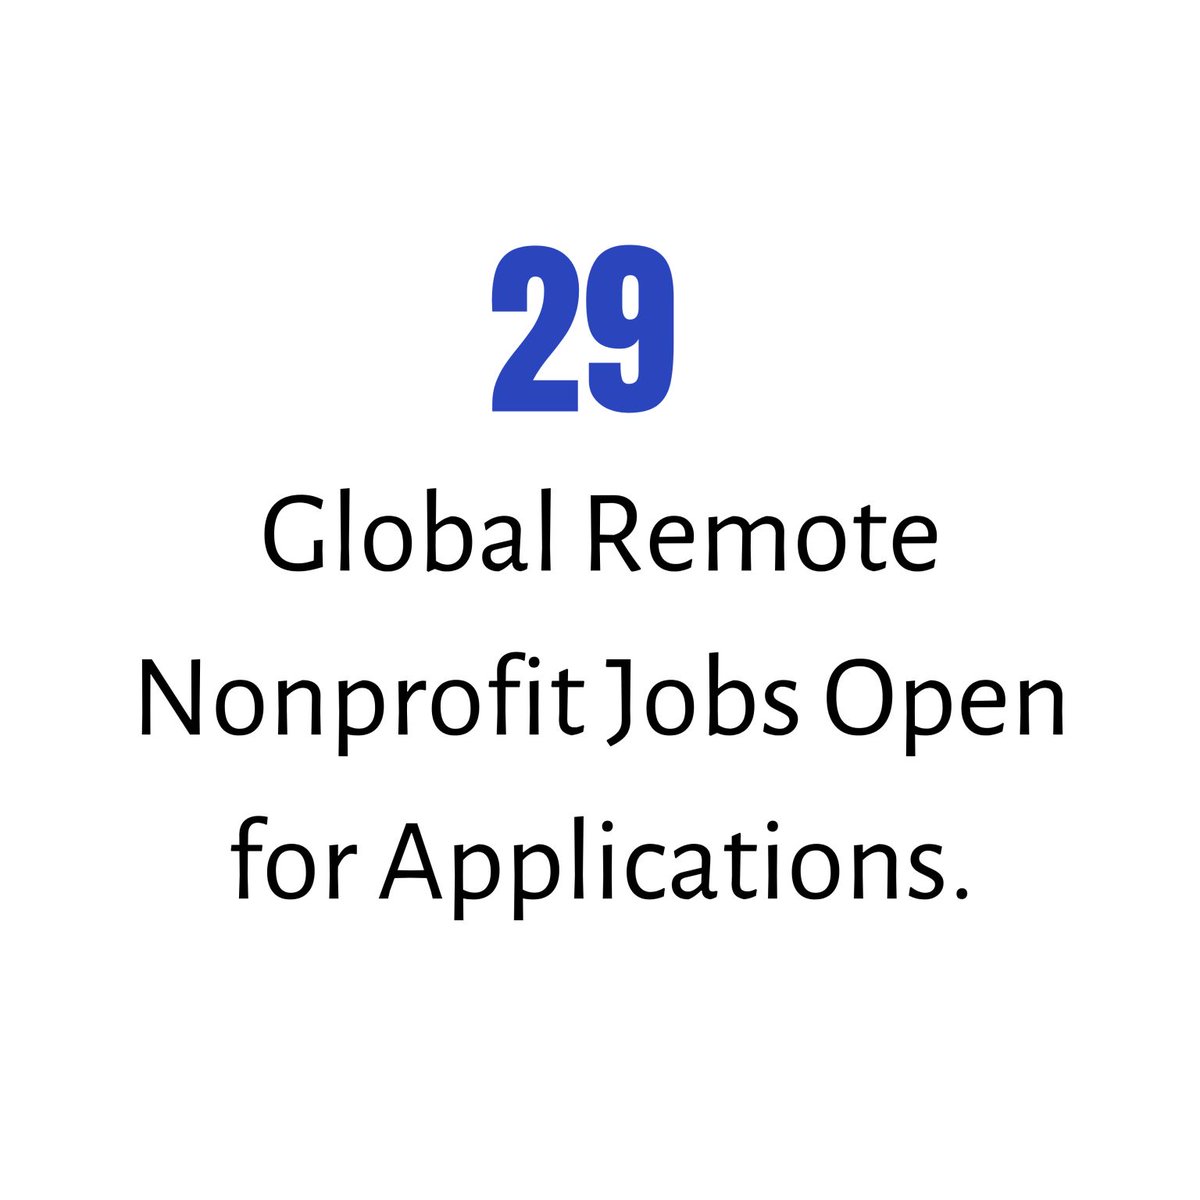 🌍 29 Global Remote Nonprofit Jobs! 🚀 Passionate about making a difference? Apply from anywhere! shorturl.at/mwHI7 🌐💼 

#NonprofitJobs #RemoteWork #GlobalOpportunities #Impact #jobsalert #hiring